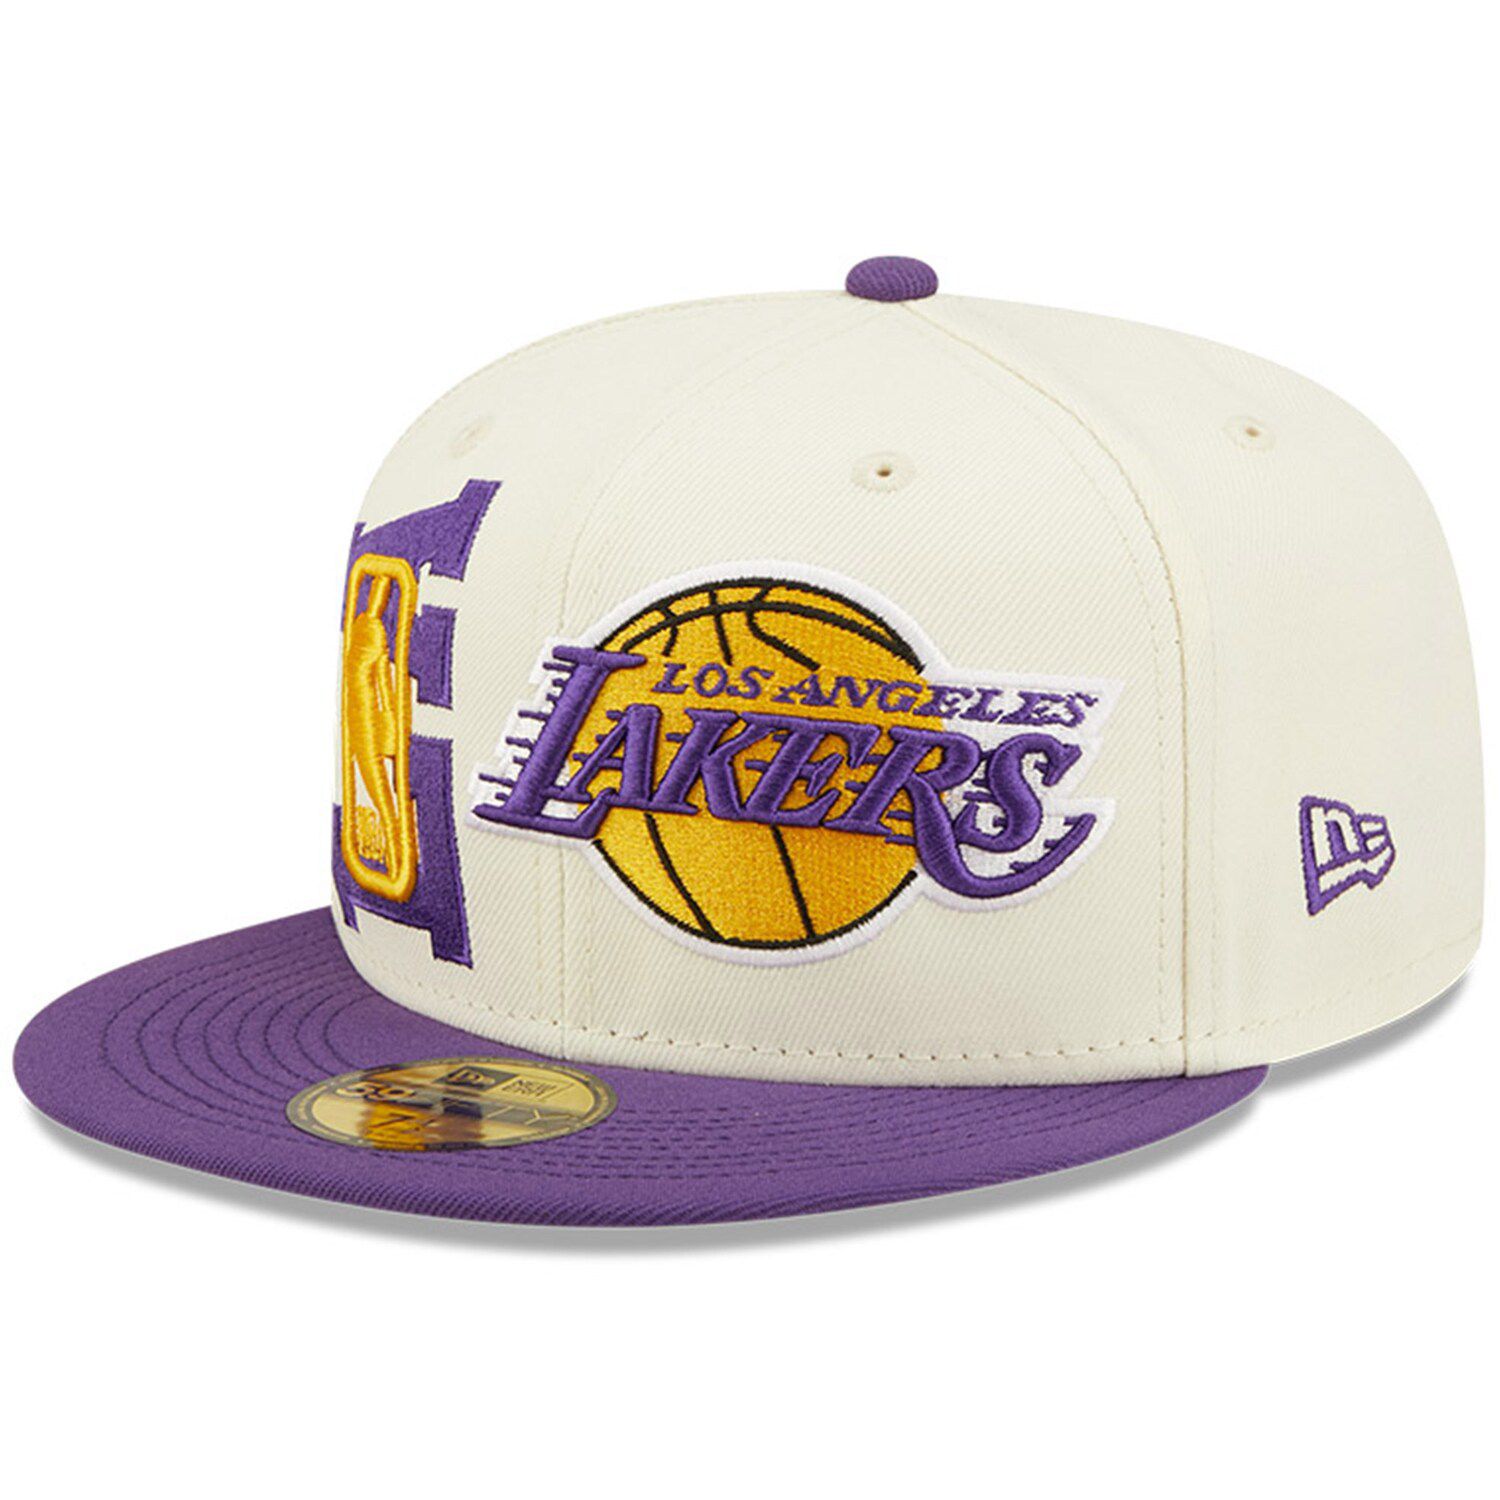 Men's Los Angeles Lakers New Era Black 17x NBA Finals Champions Crown  59FIFTY Fitted Hat